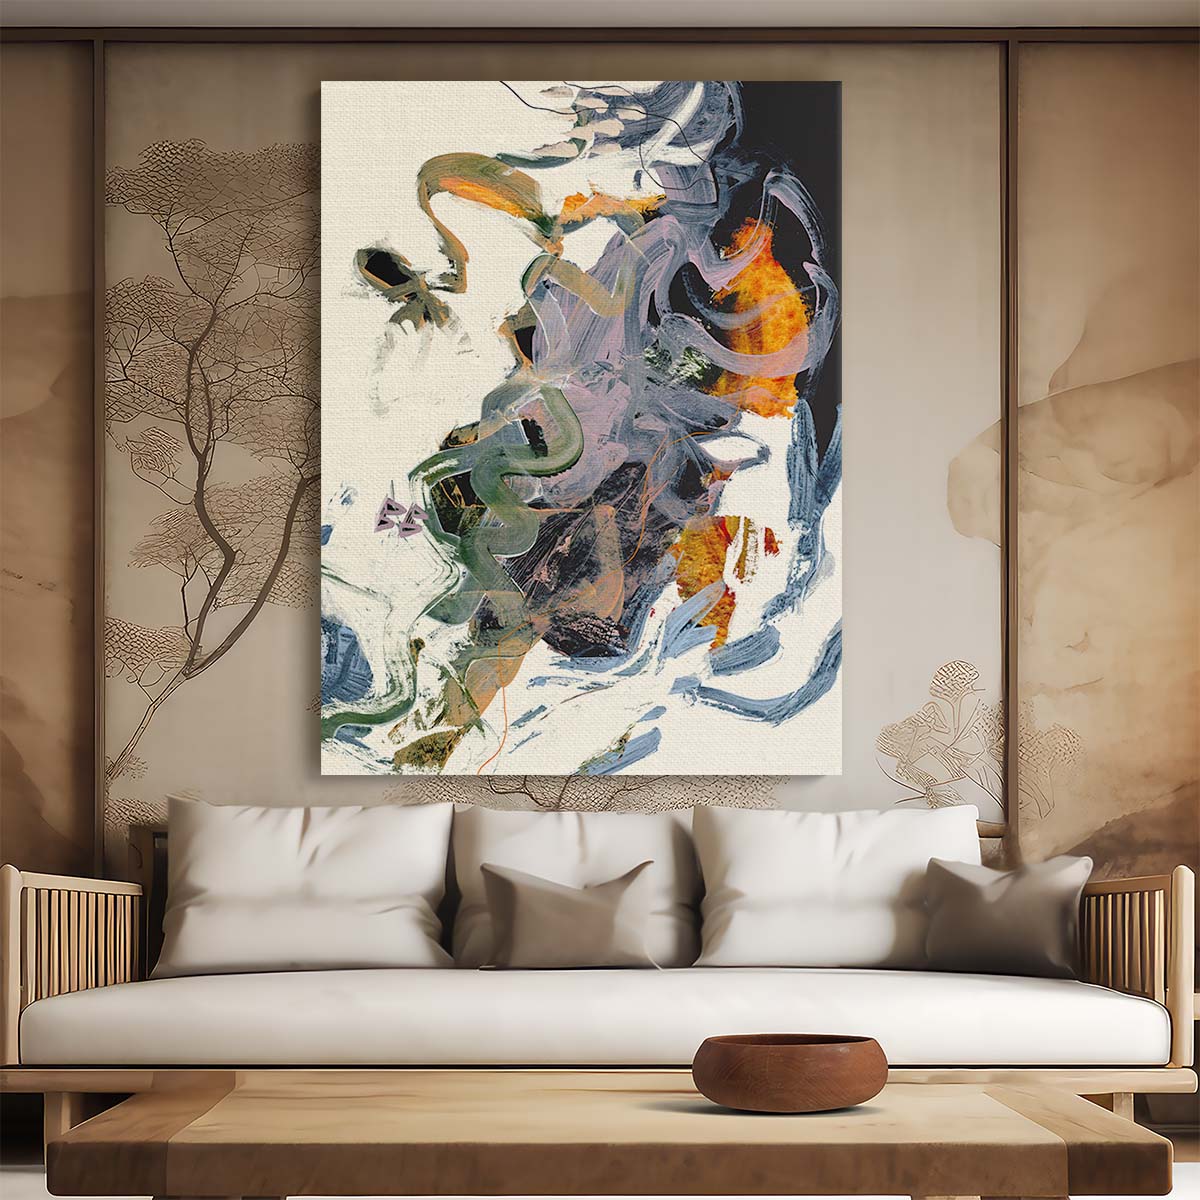 Colorful Abstract Acrylic Illustration Wall Art by Dan Hobday by Luxuriance Designs, made in USA